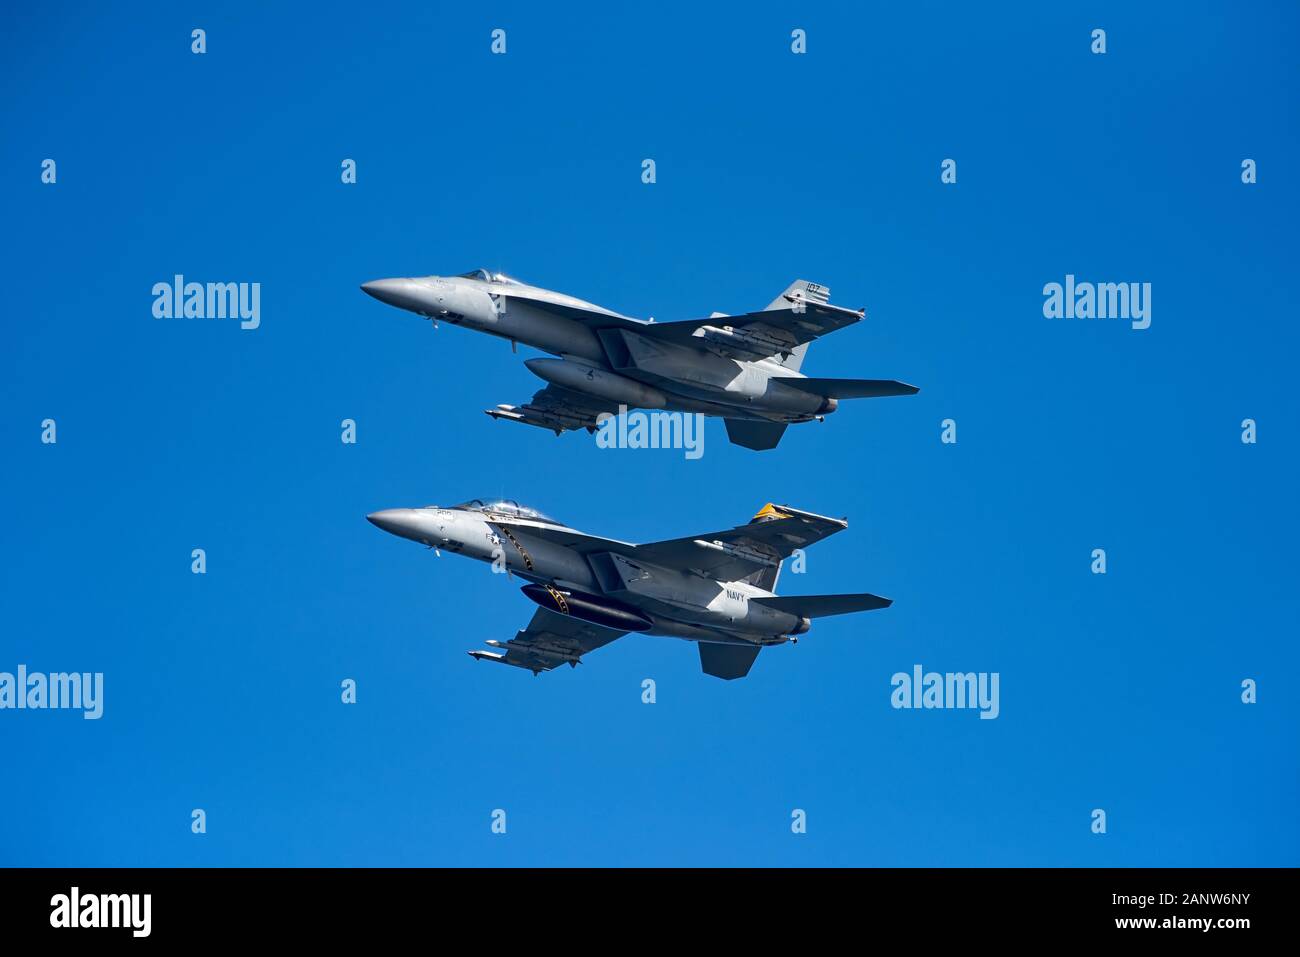 Helsinki, Finland - 9 June 2017: Two US Navy F/A-18 E Super Hornet multirole fighter planes over Helsinki at the Kaivopuisto Air Show 2017. Stock Photo